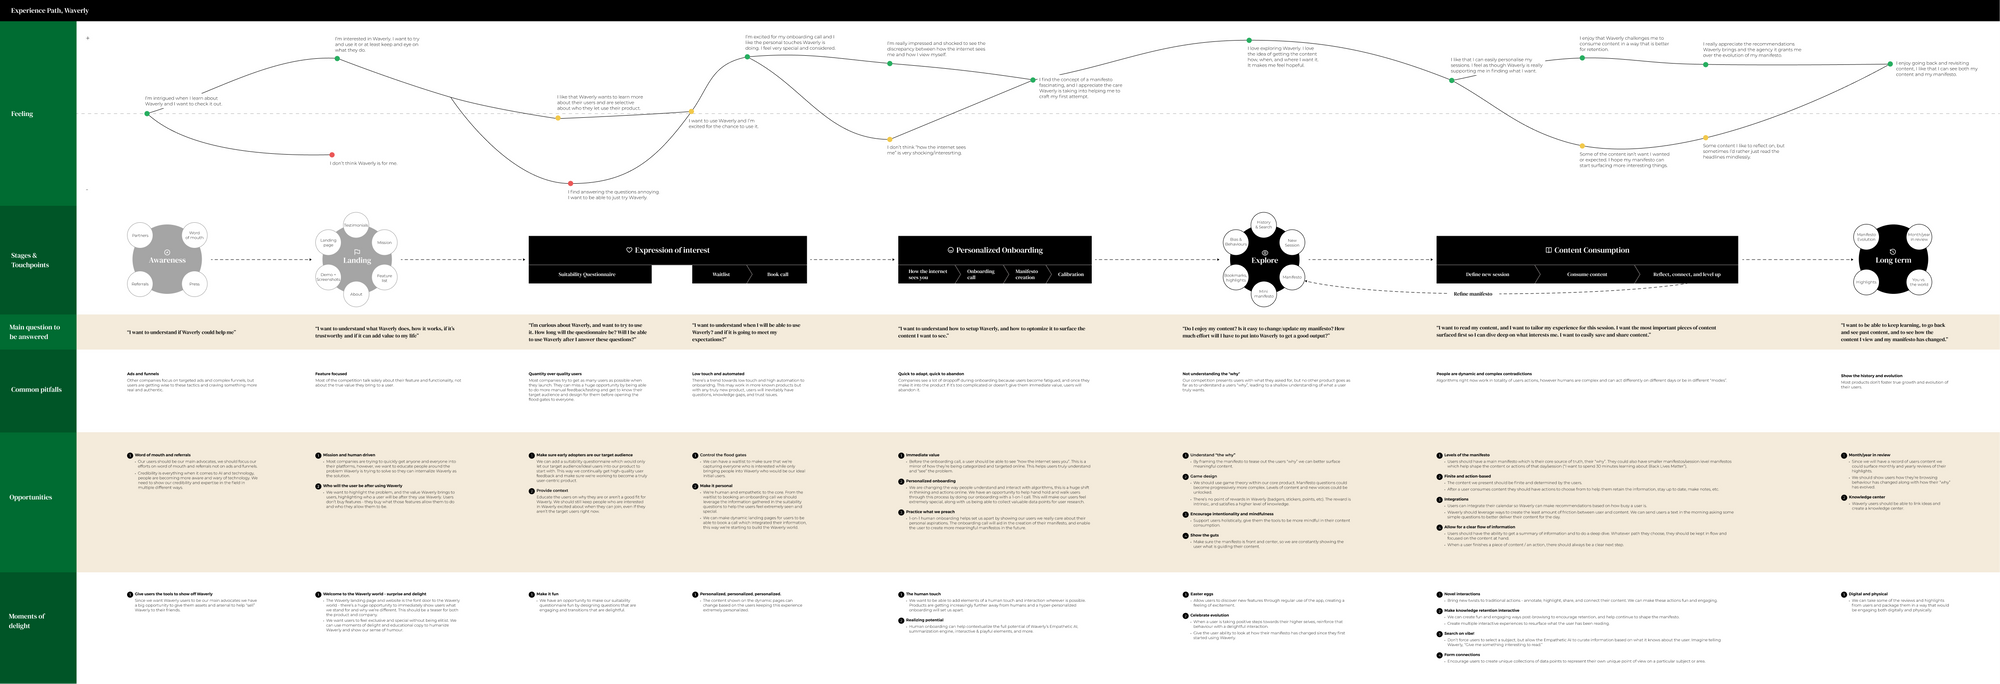 An initial mapping of the user flow for the application.